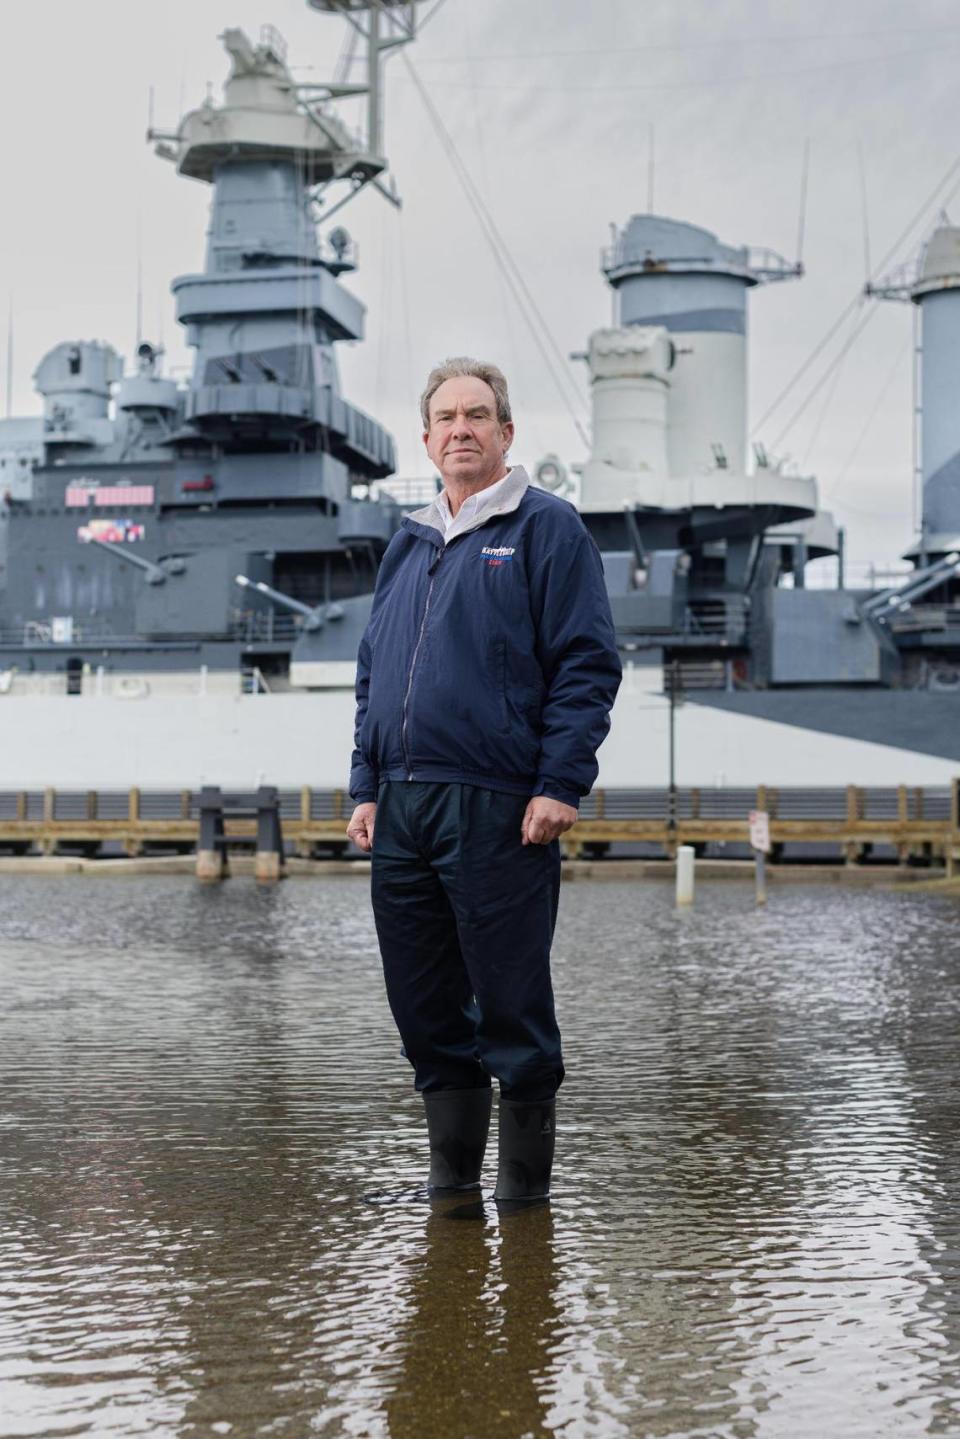 Retired U.S. Navy Capt. Terry Bragg, the executive director of the Battleship North Carolina museum, poses for a portrait in a flooded parking lot at the historic site in November.